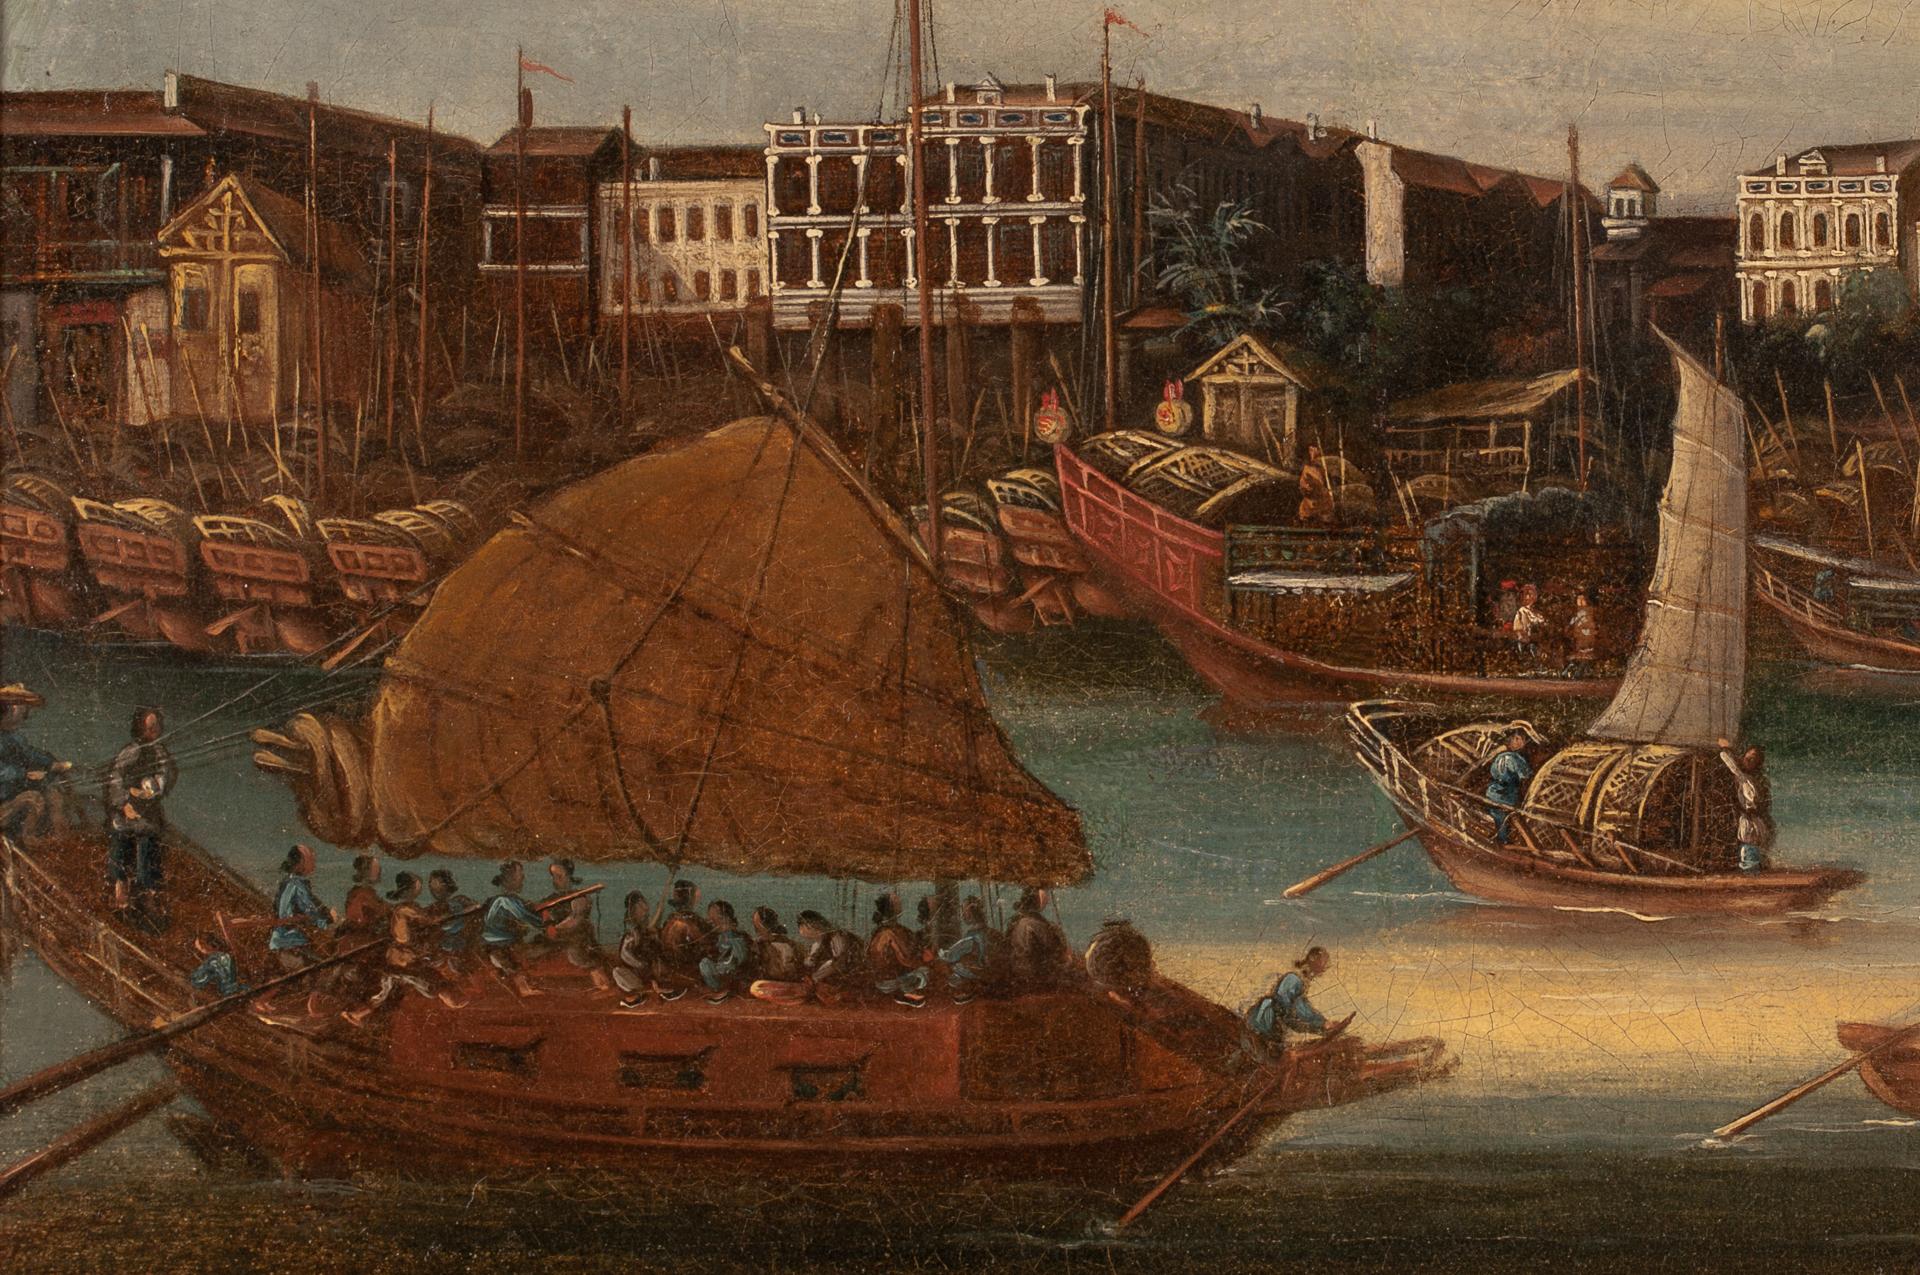 Sought by collectors worldwide, art and artifacts showing an early western presence in the Orient boomed with the opening of the China Trade by way of the sailing ship. The surviving paintings which capture the important Chinese harbors of the 18th